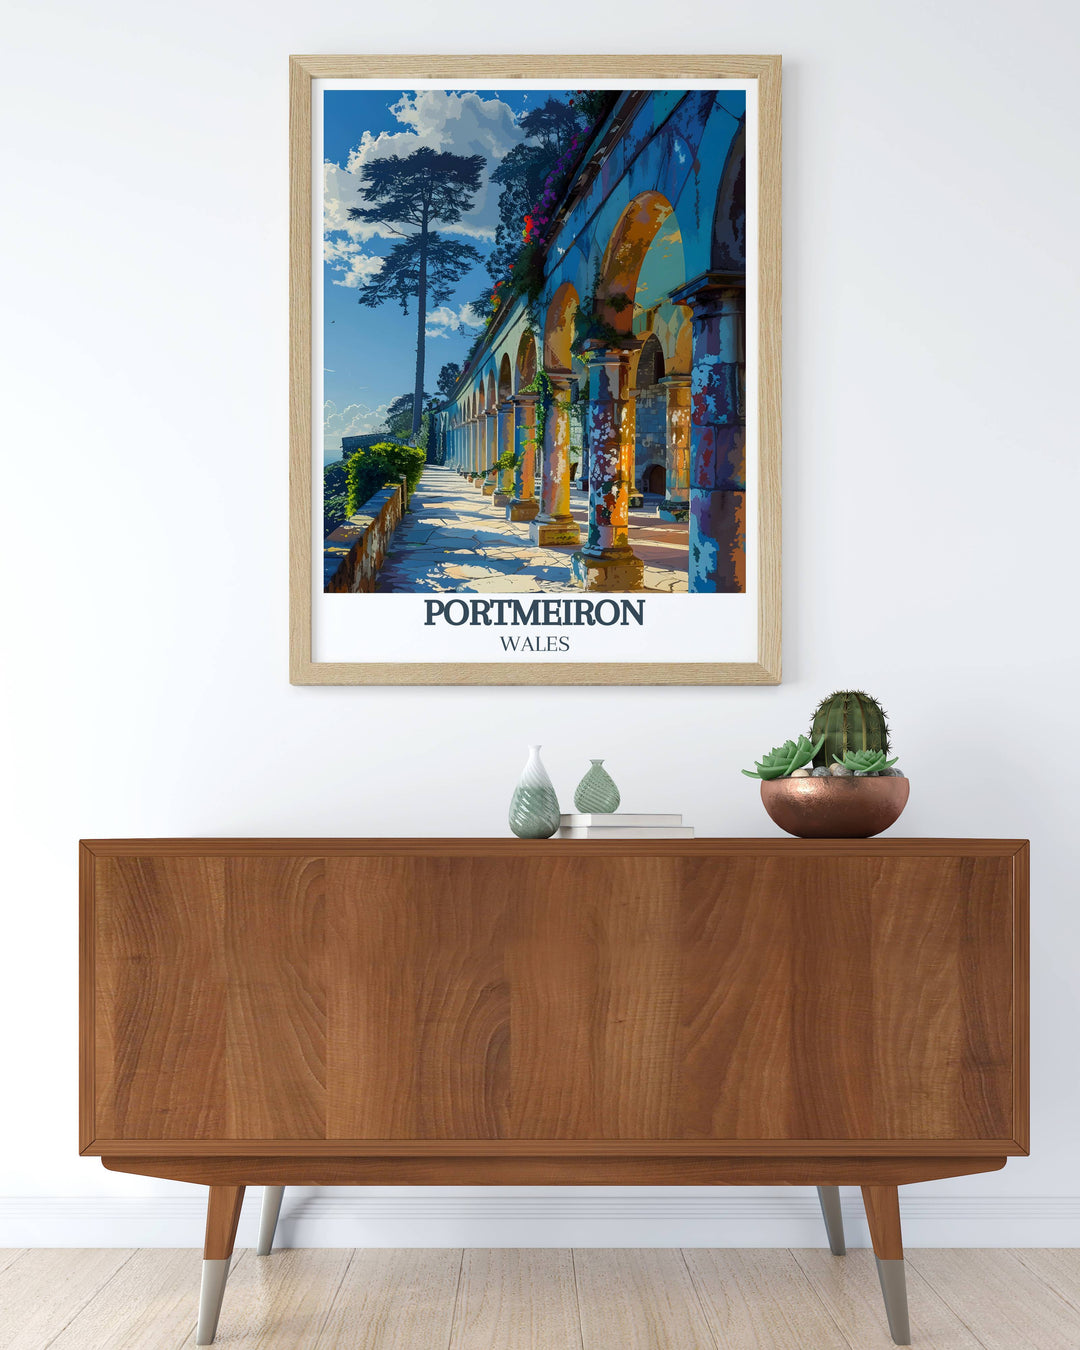 Illustrate your love for Wales with our exquisite Travel Posters. Featuring iconic landmarks and breathtaking scenery, each poster invites you to explore the beauty of this captivating destination.